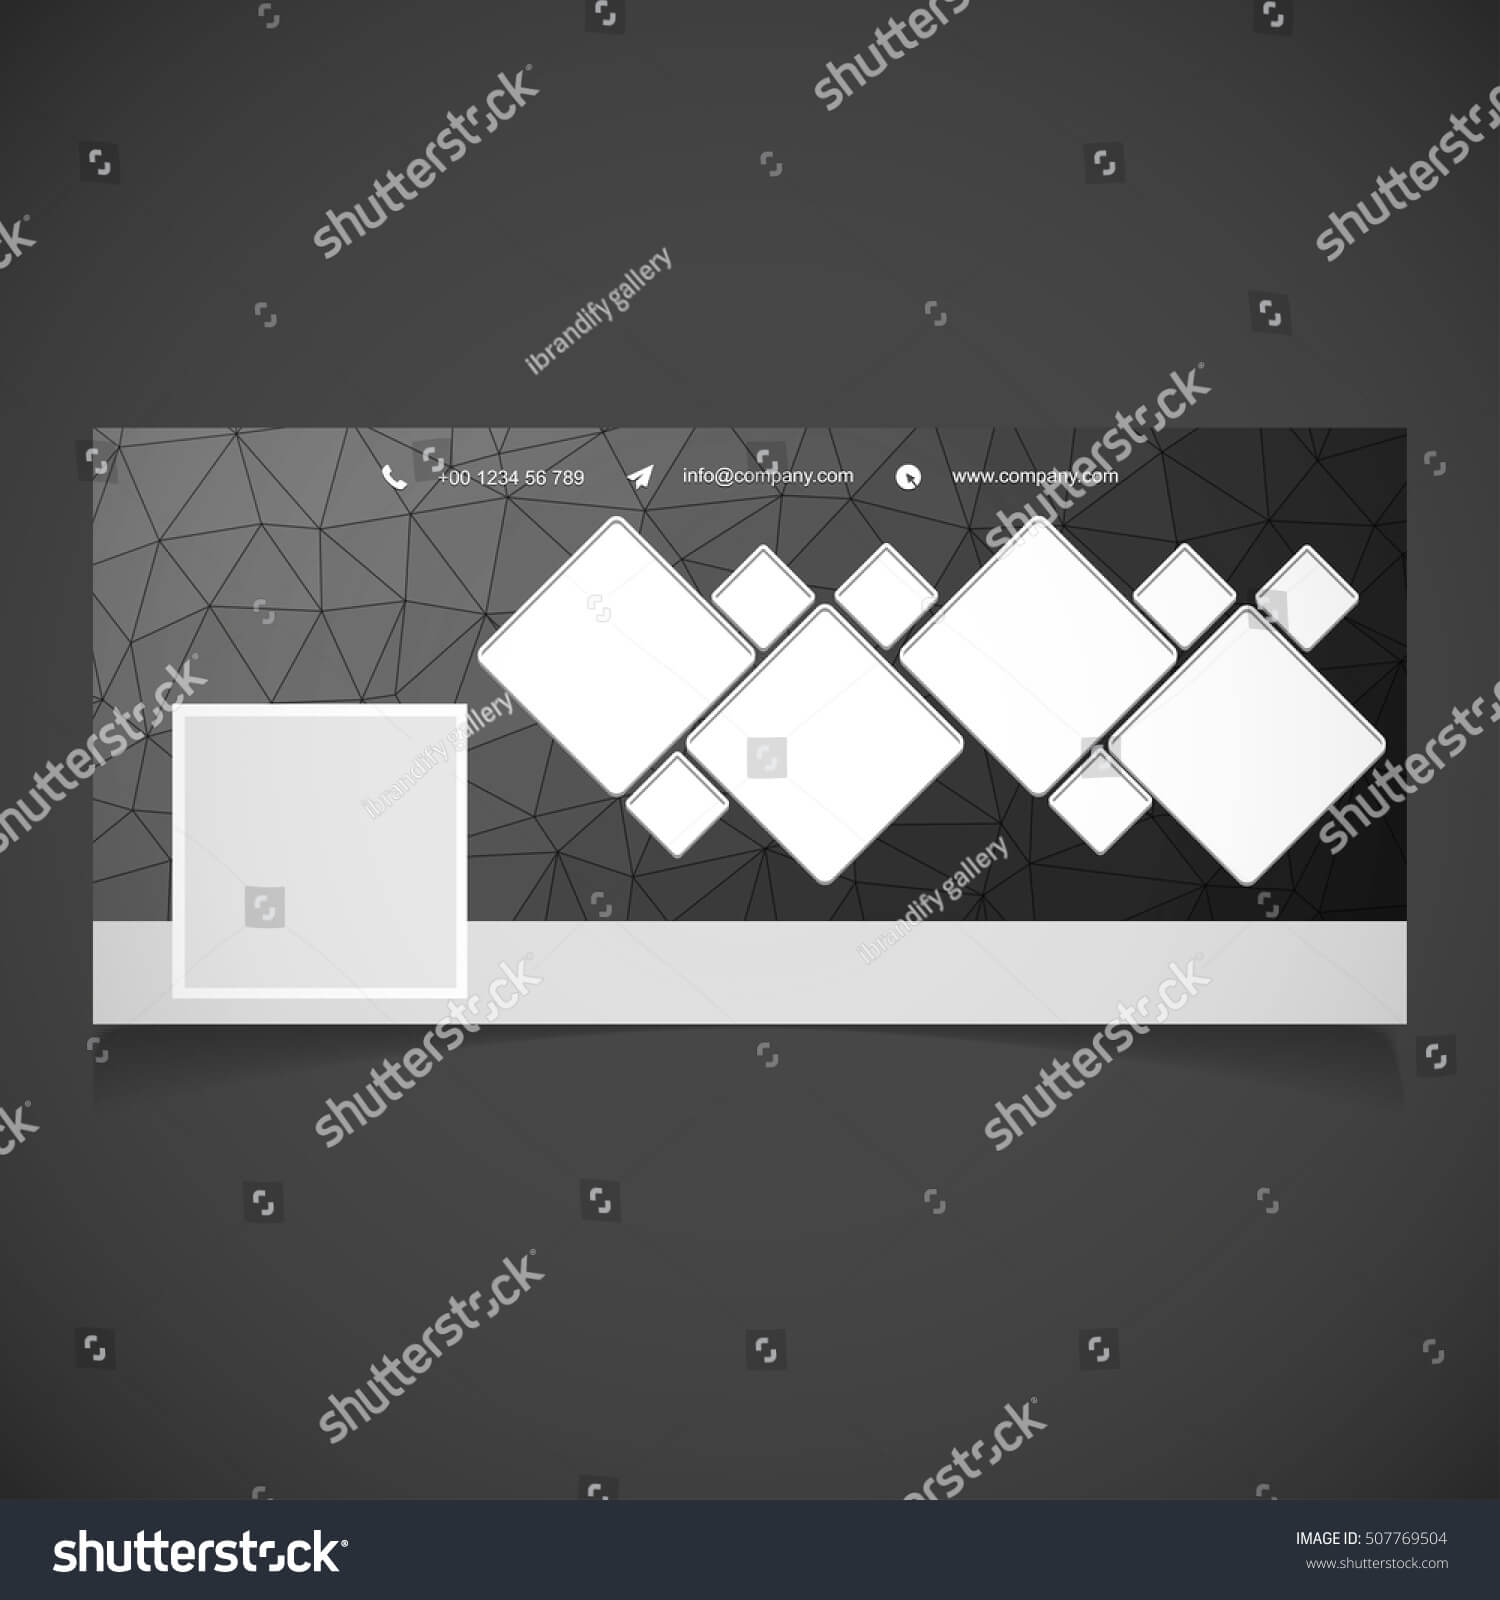 Creative Black Background Photography Banner Template Stock With Photography Banner Template